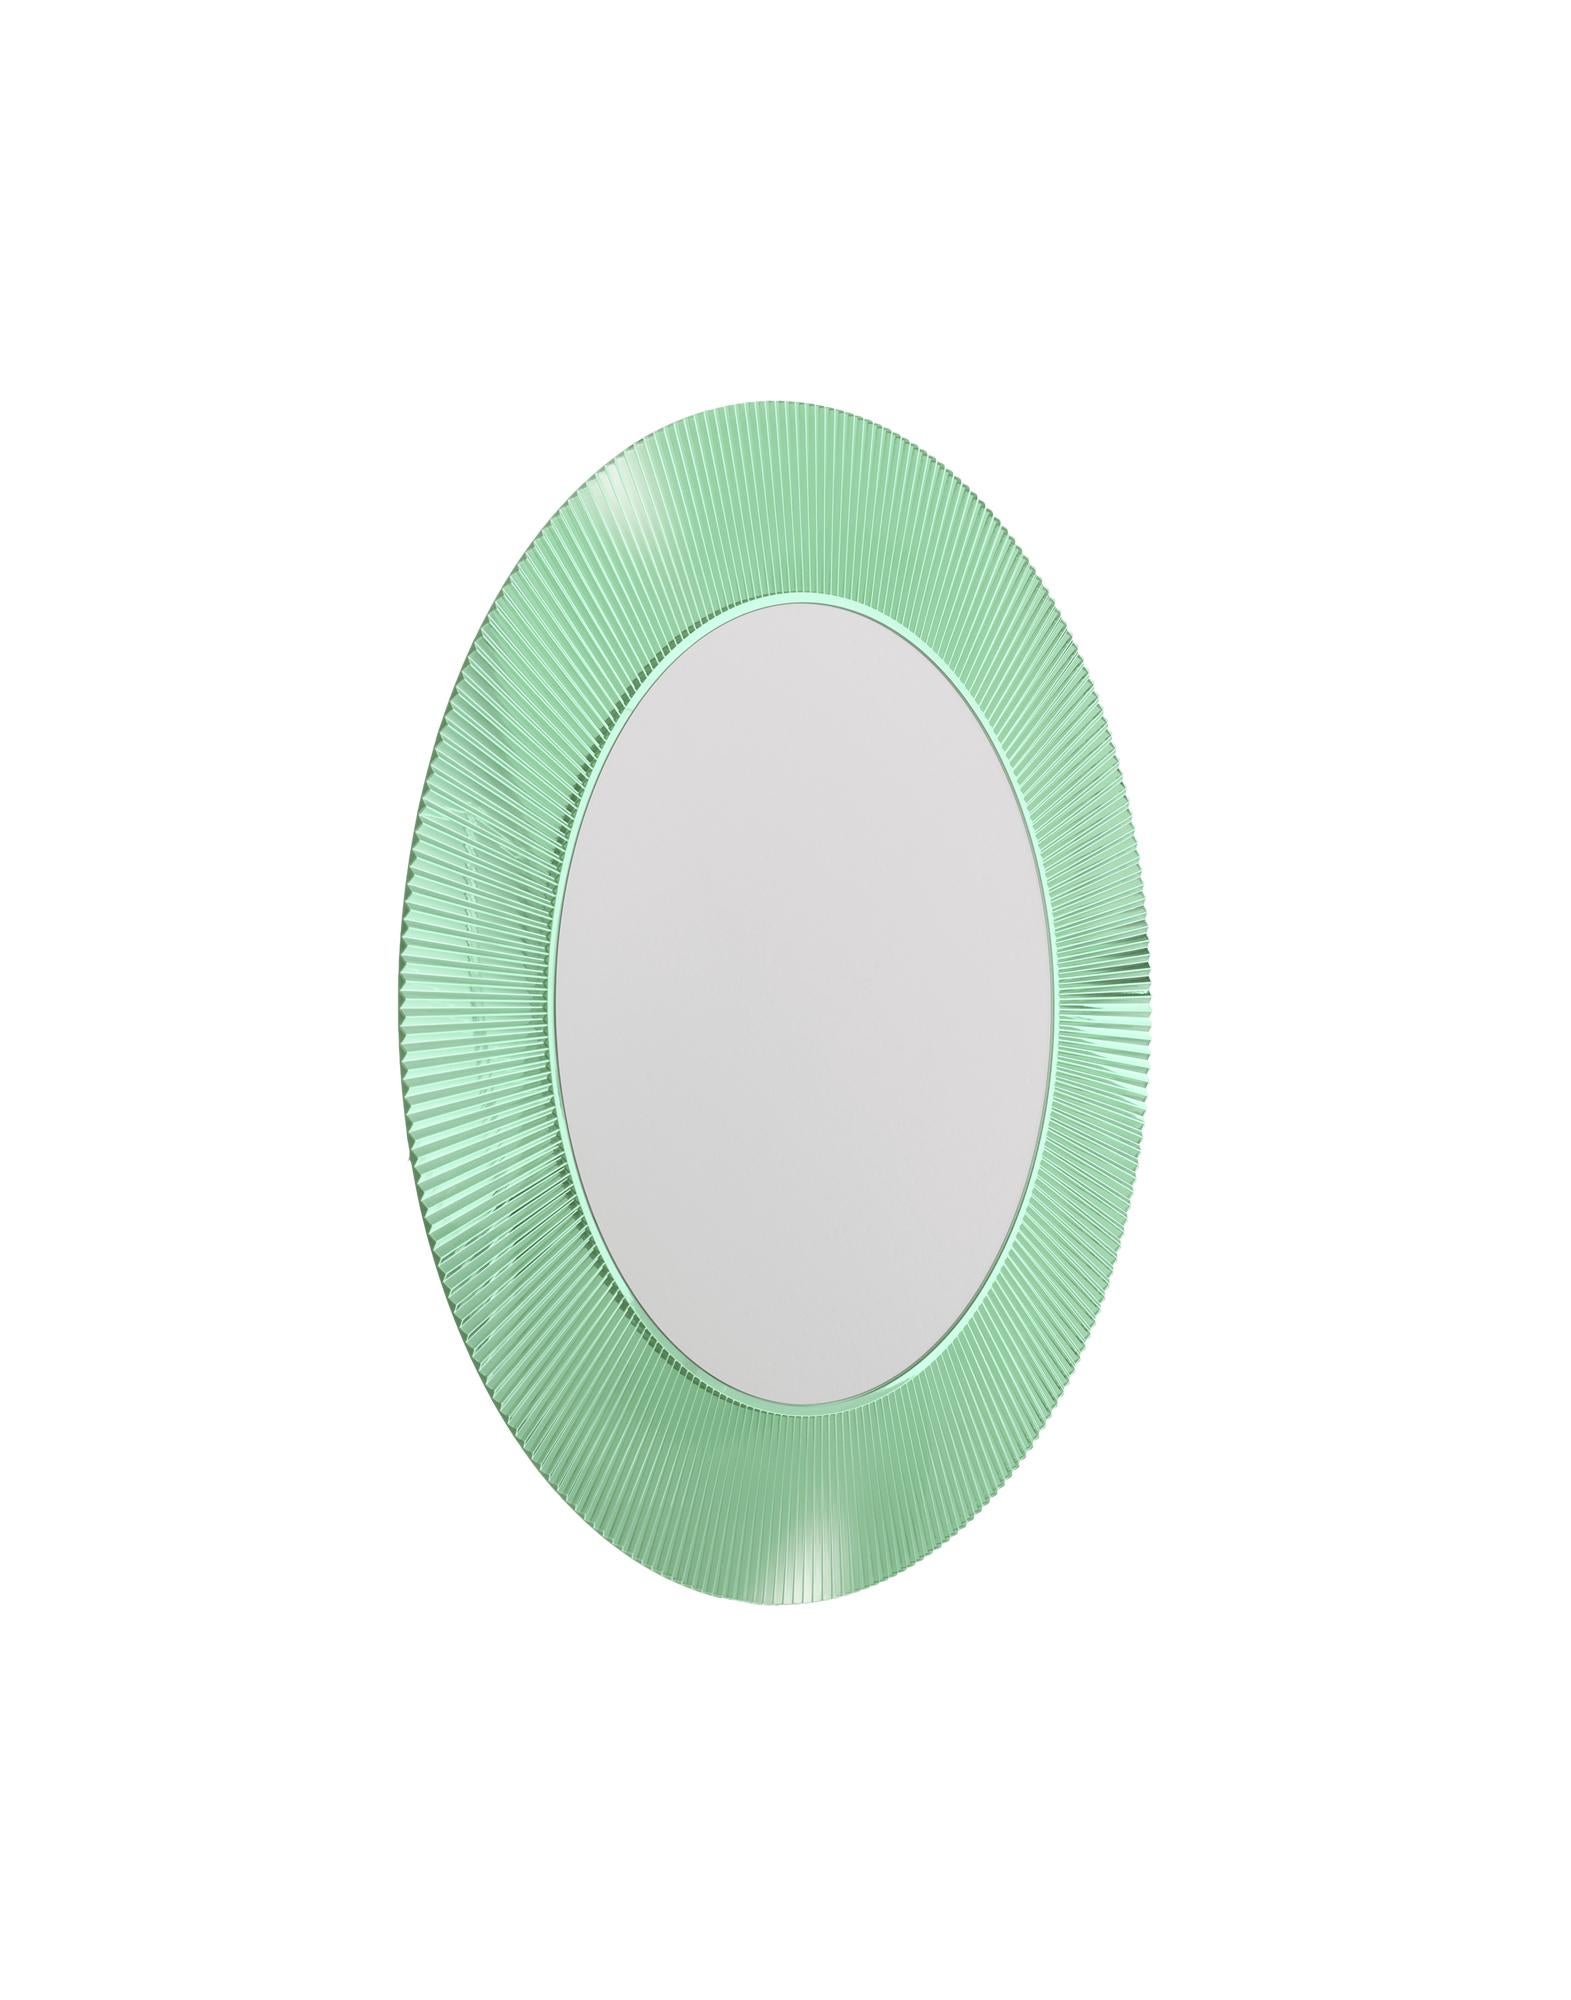 Round mirror with a transparent or colored PMMA frame, with a unique pleated effect. The possibility of applying transparency even to gold and chrome, makes this mirror an extremely versatile and transformational design piece, suitable for use in